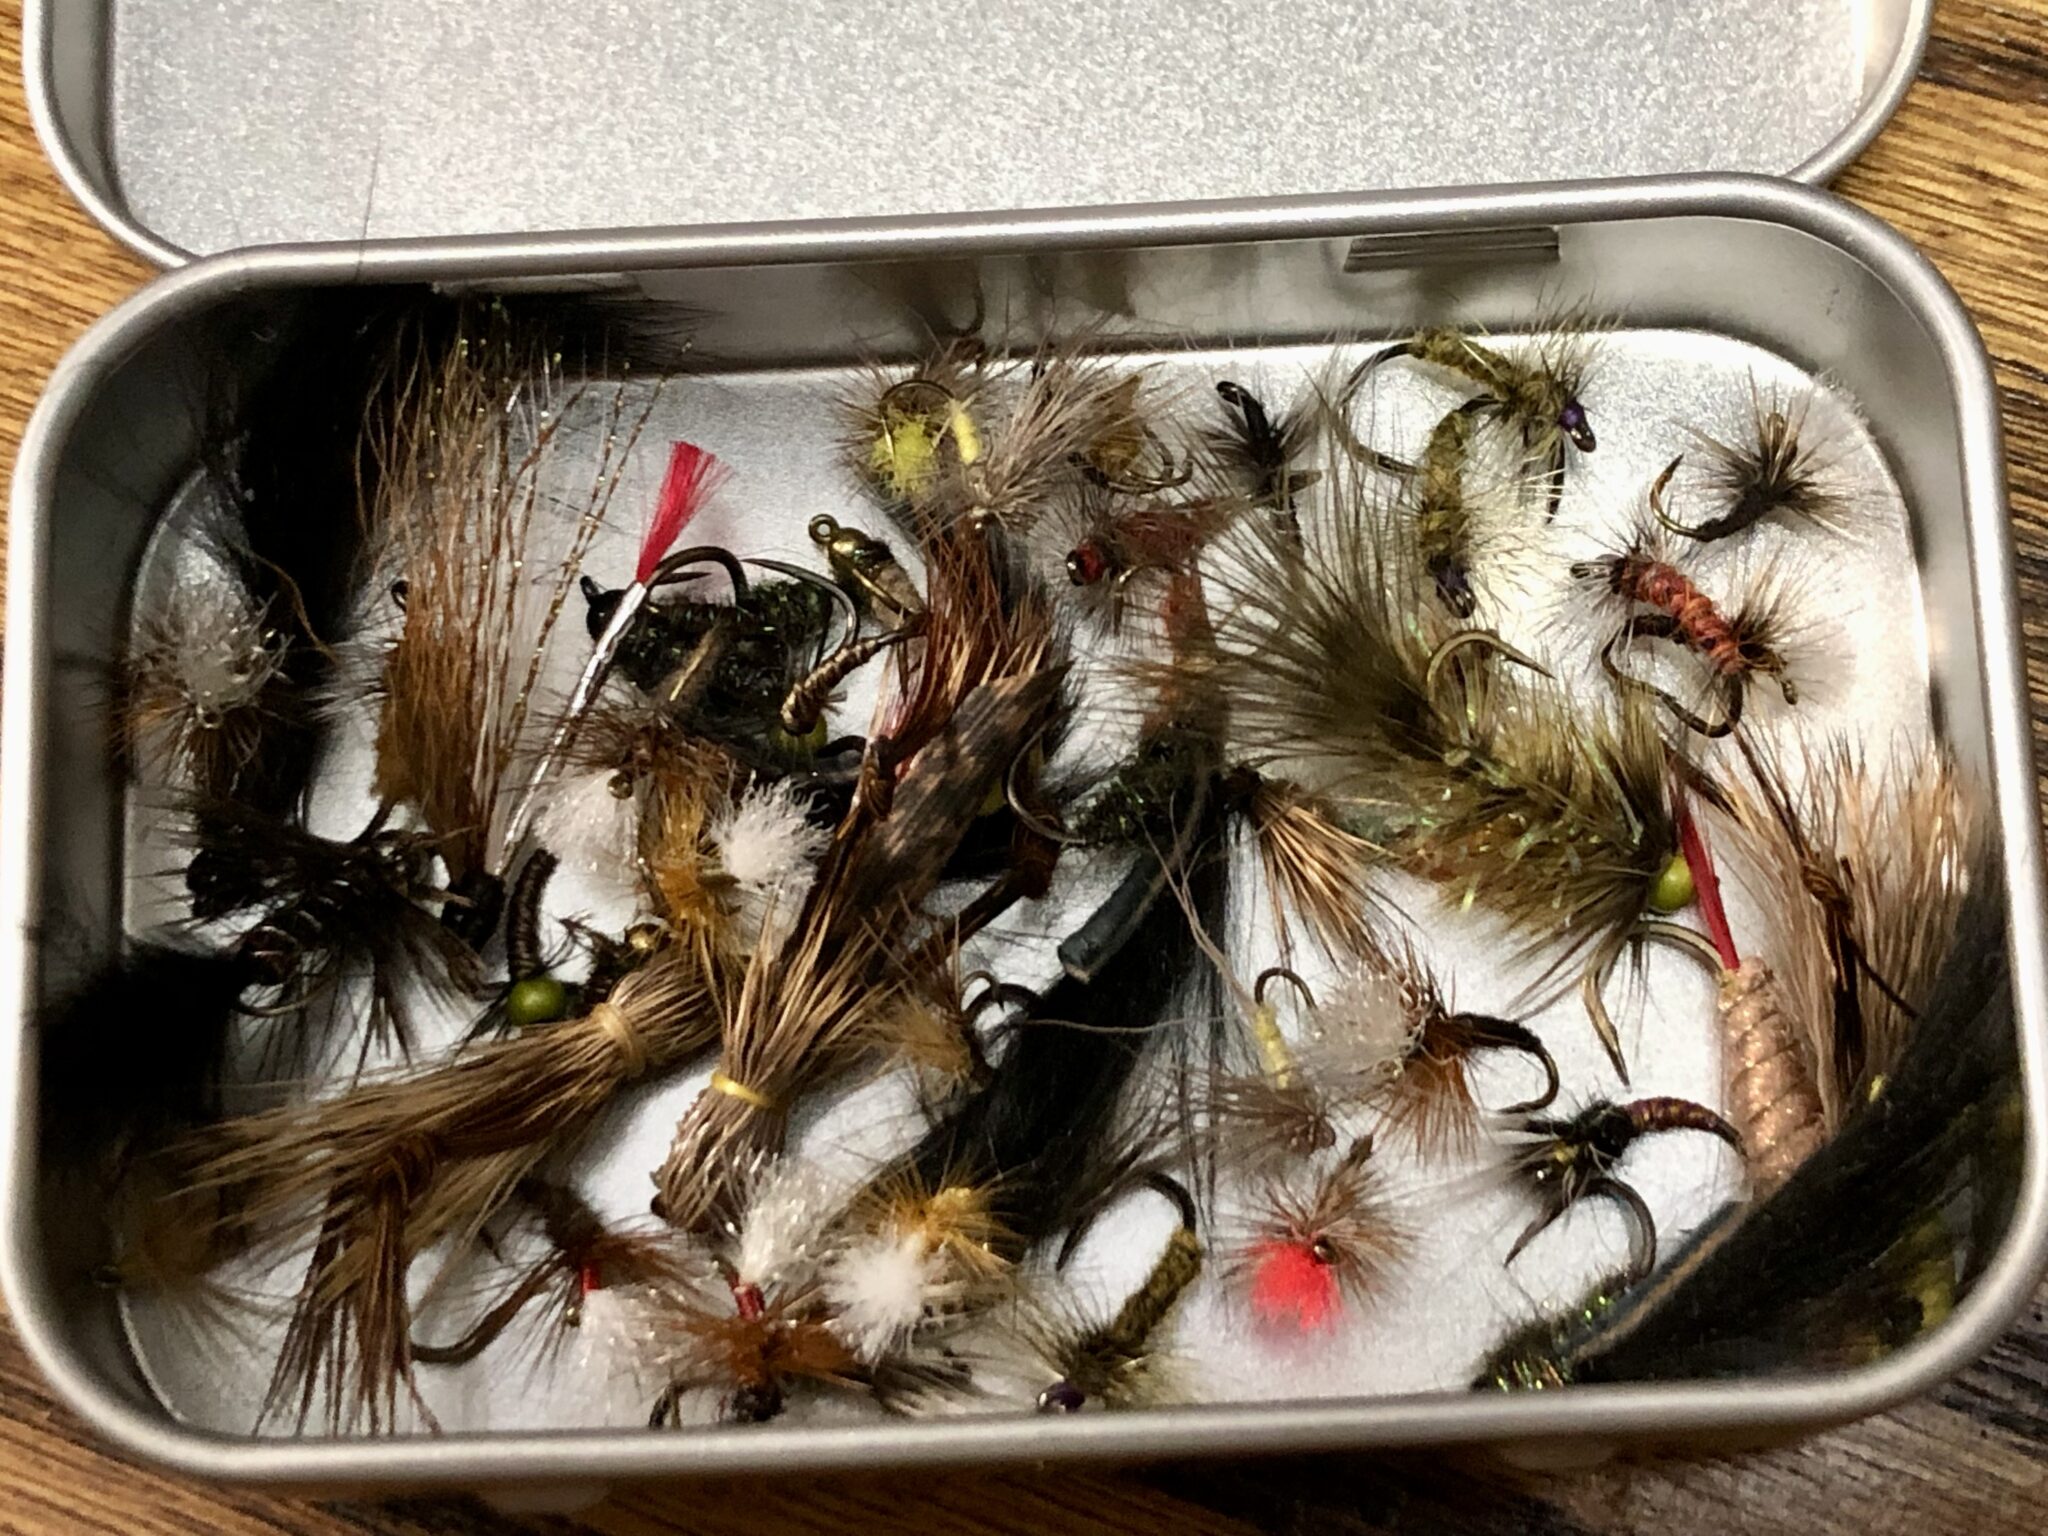 The Junk Drawer Fly Box